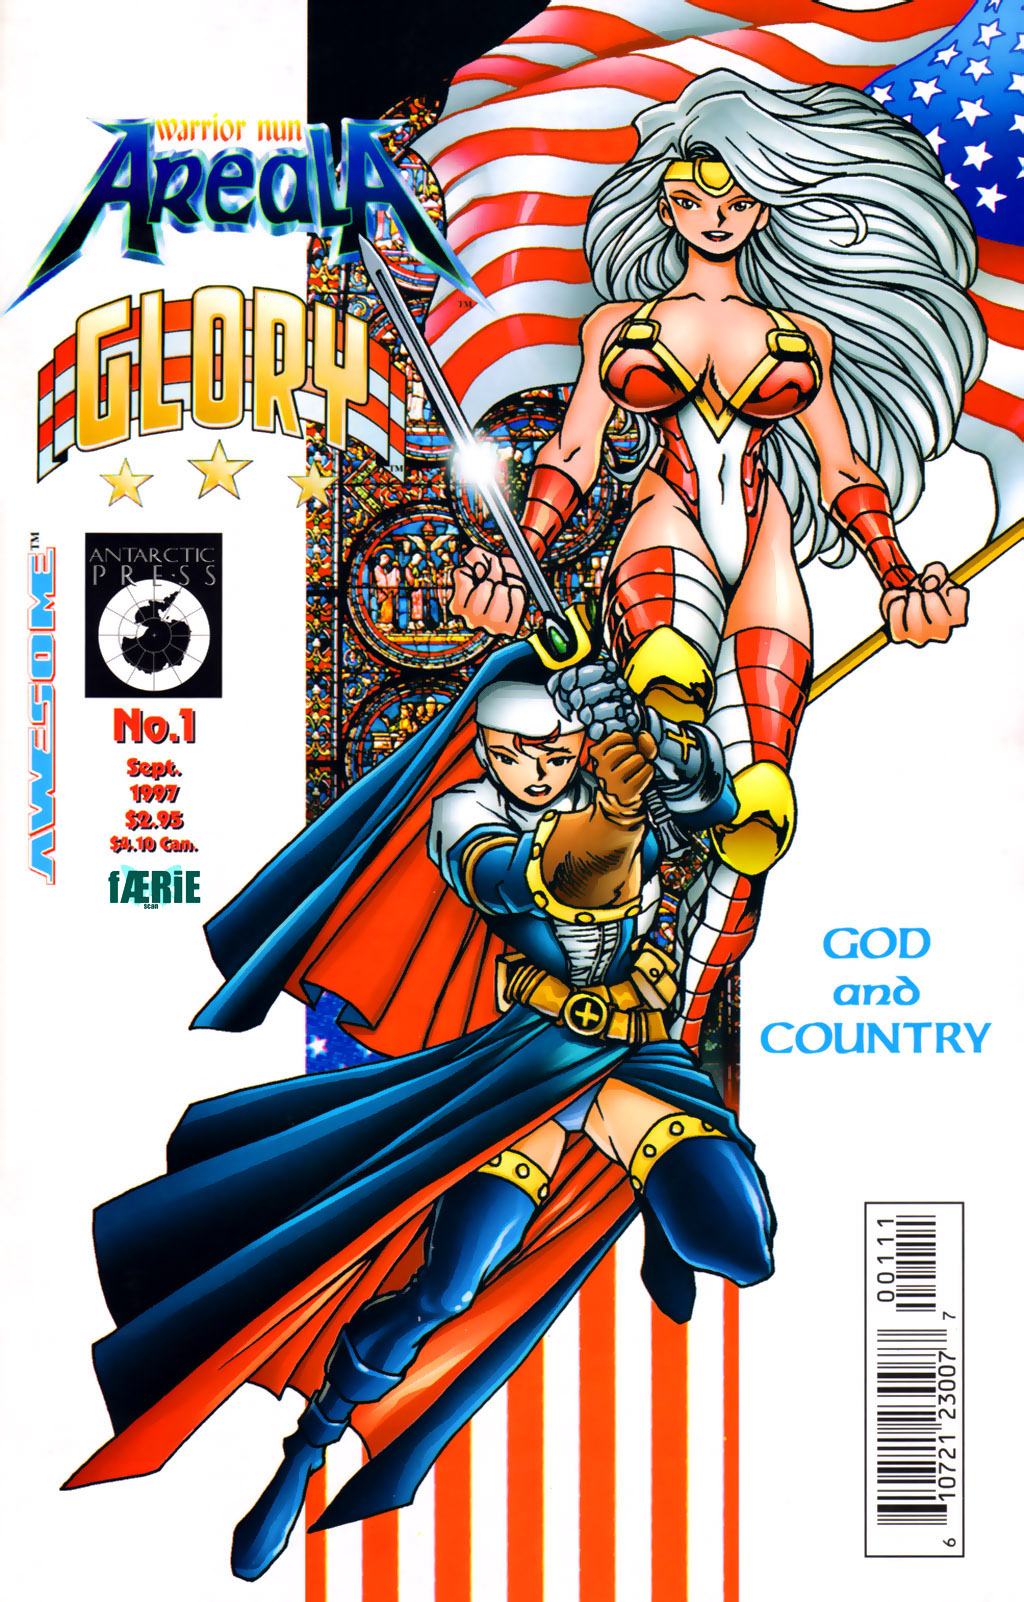 Read online Warrior Nun Areala and Glory comic -  Issue # Full - 1